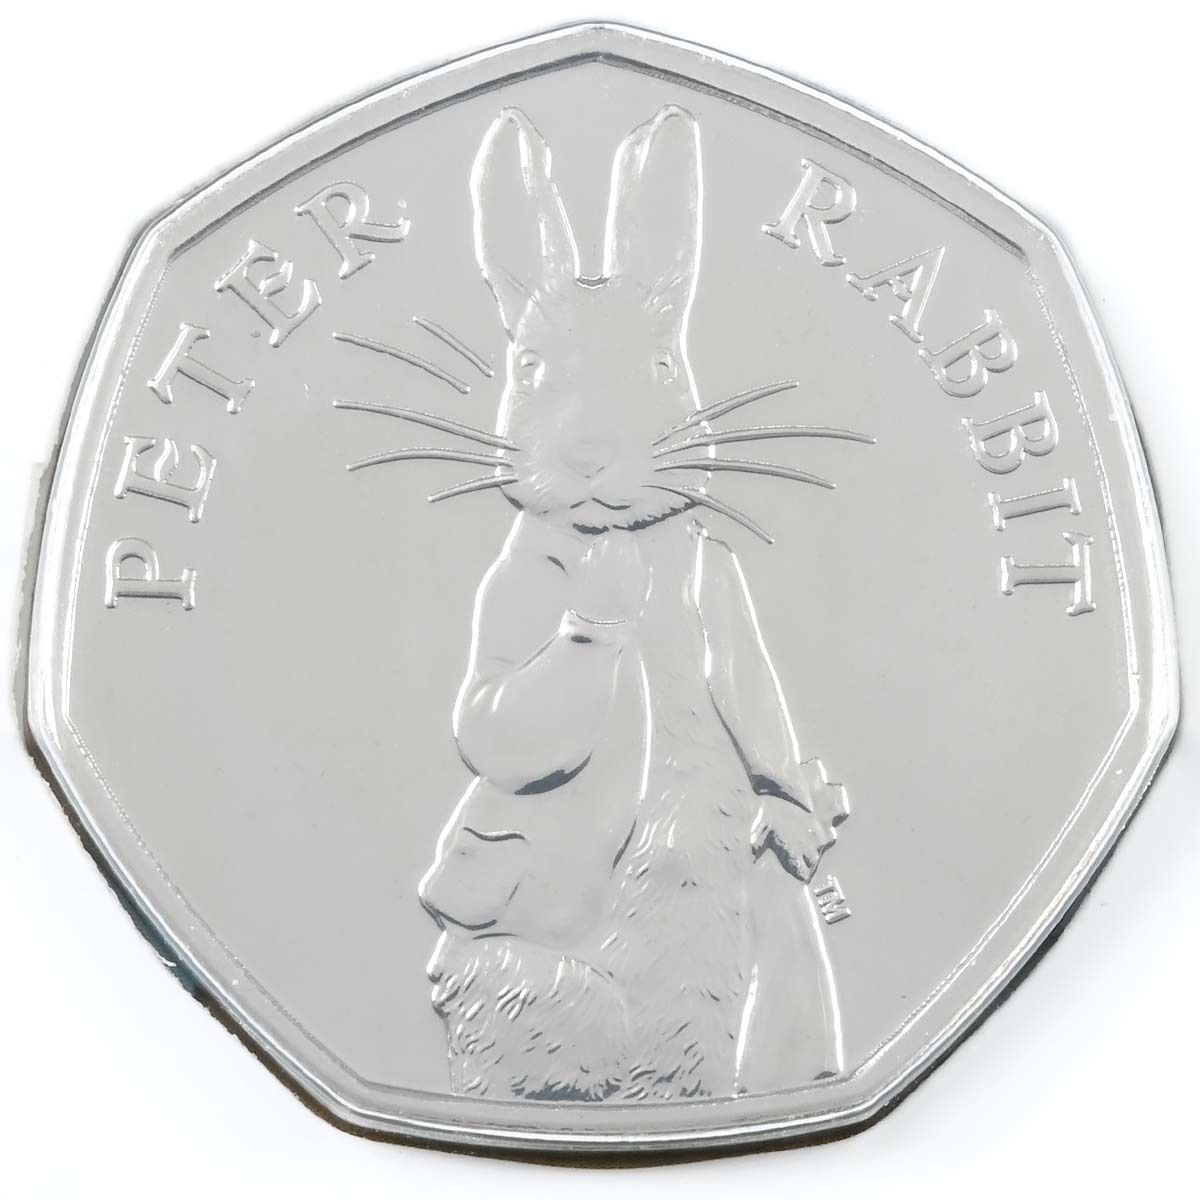 UK19PRBU 2019 Beatrix Potter Peter Rabbit Fifty Pence Brilliant Uncirculated Coin In Folder Reverse